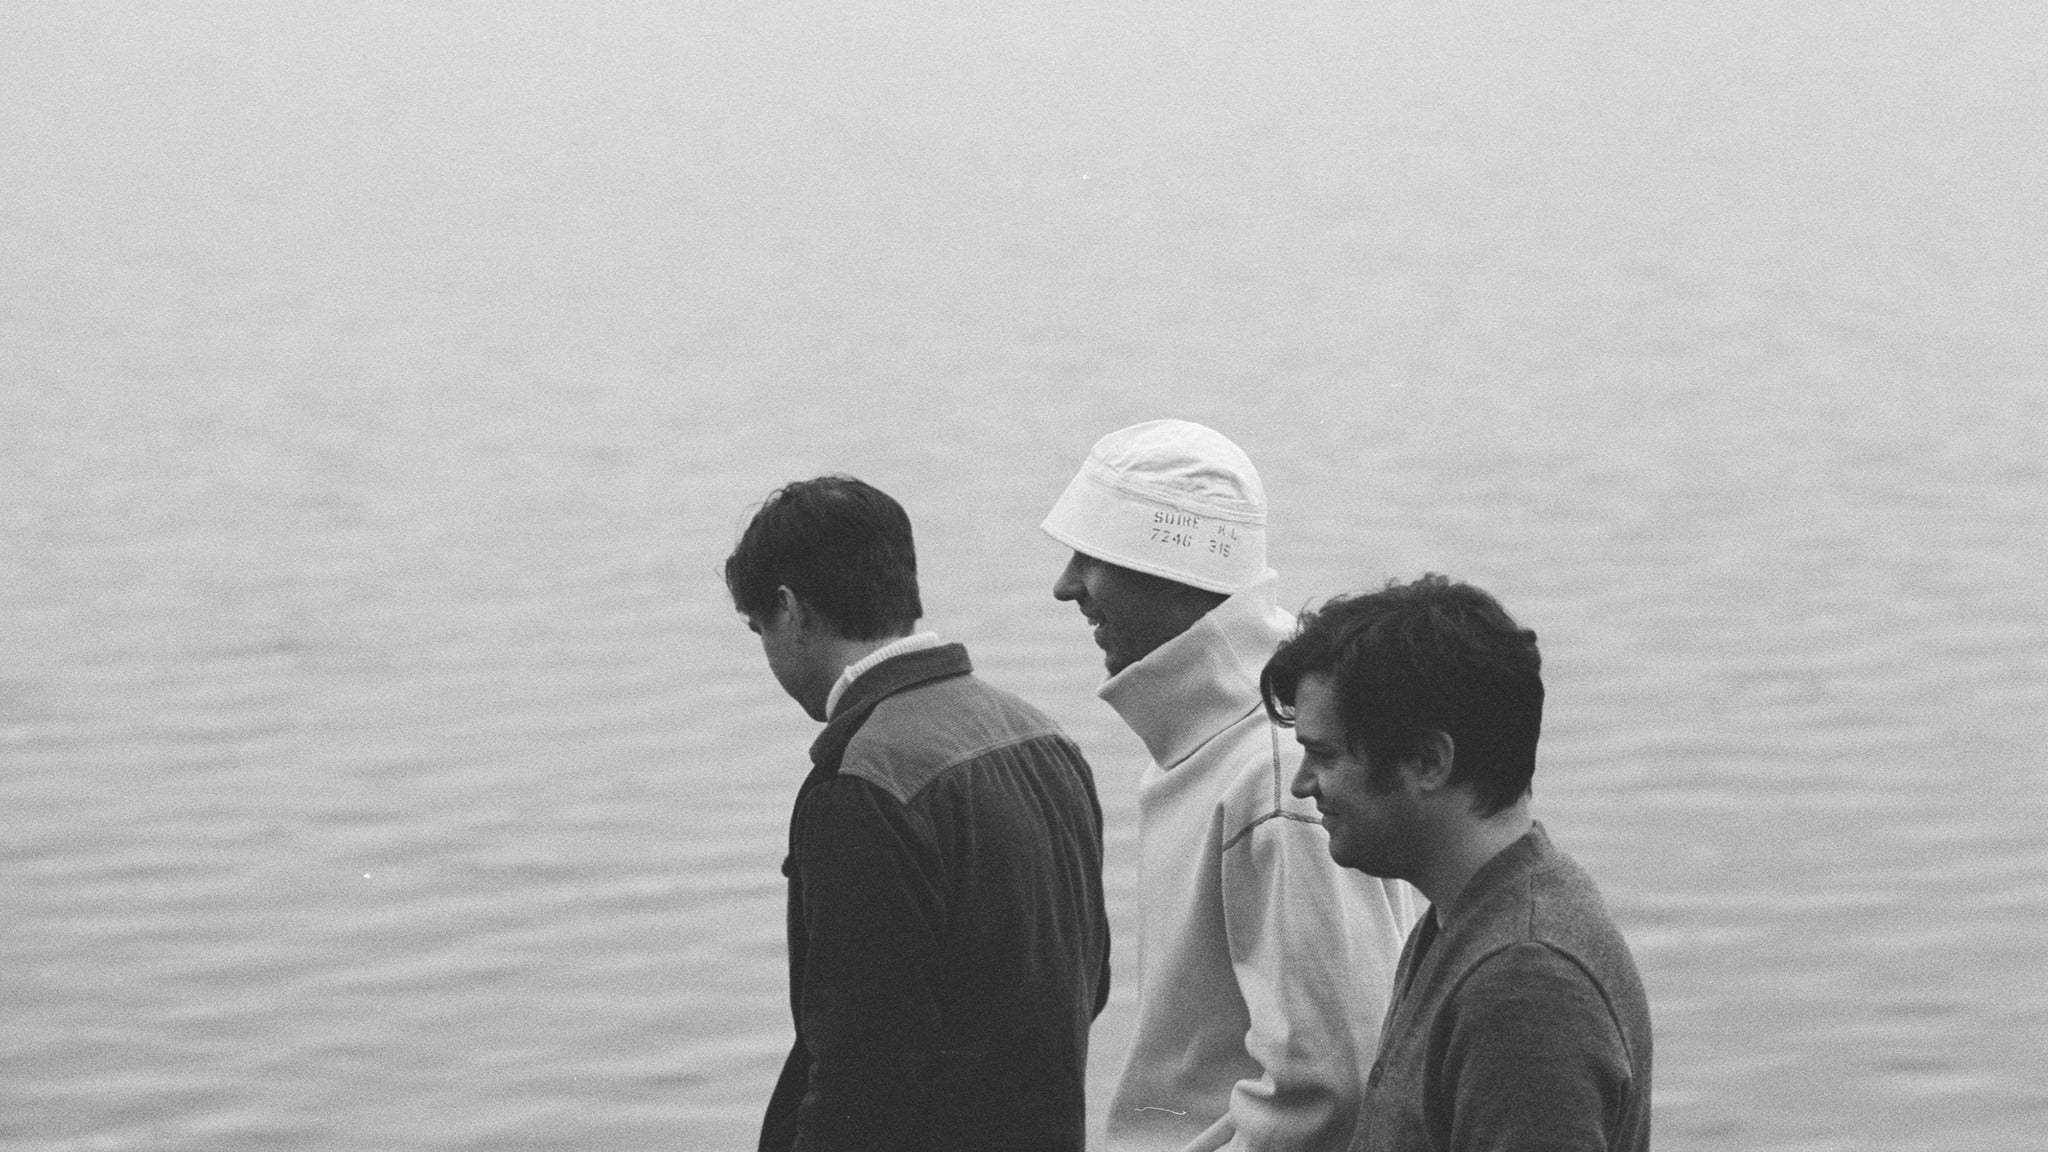 BADBADNOTGOOD: Talk Memory Tour in Vancouver promo photo for Spotify presale offer code